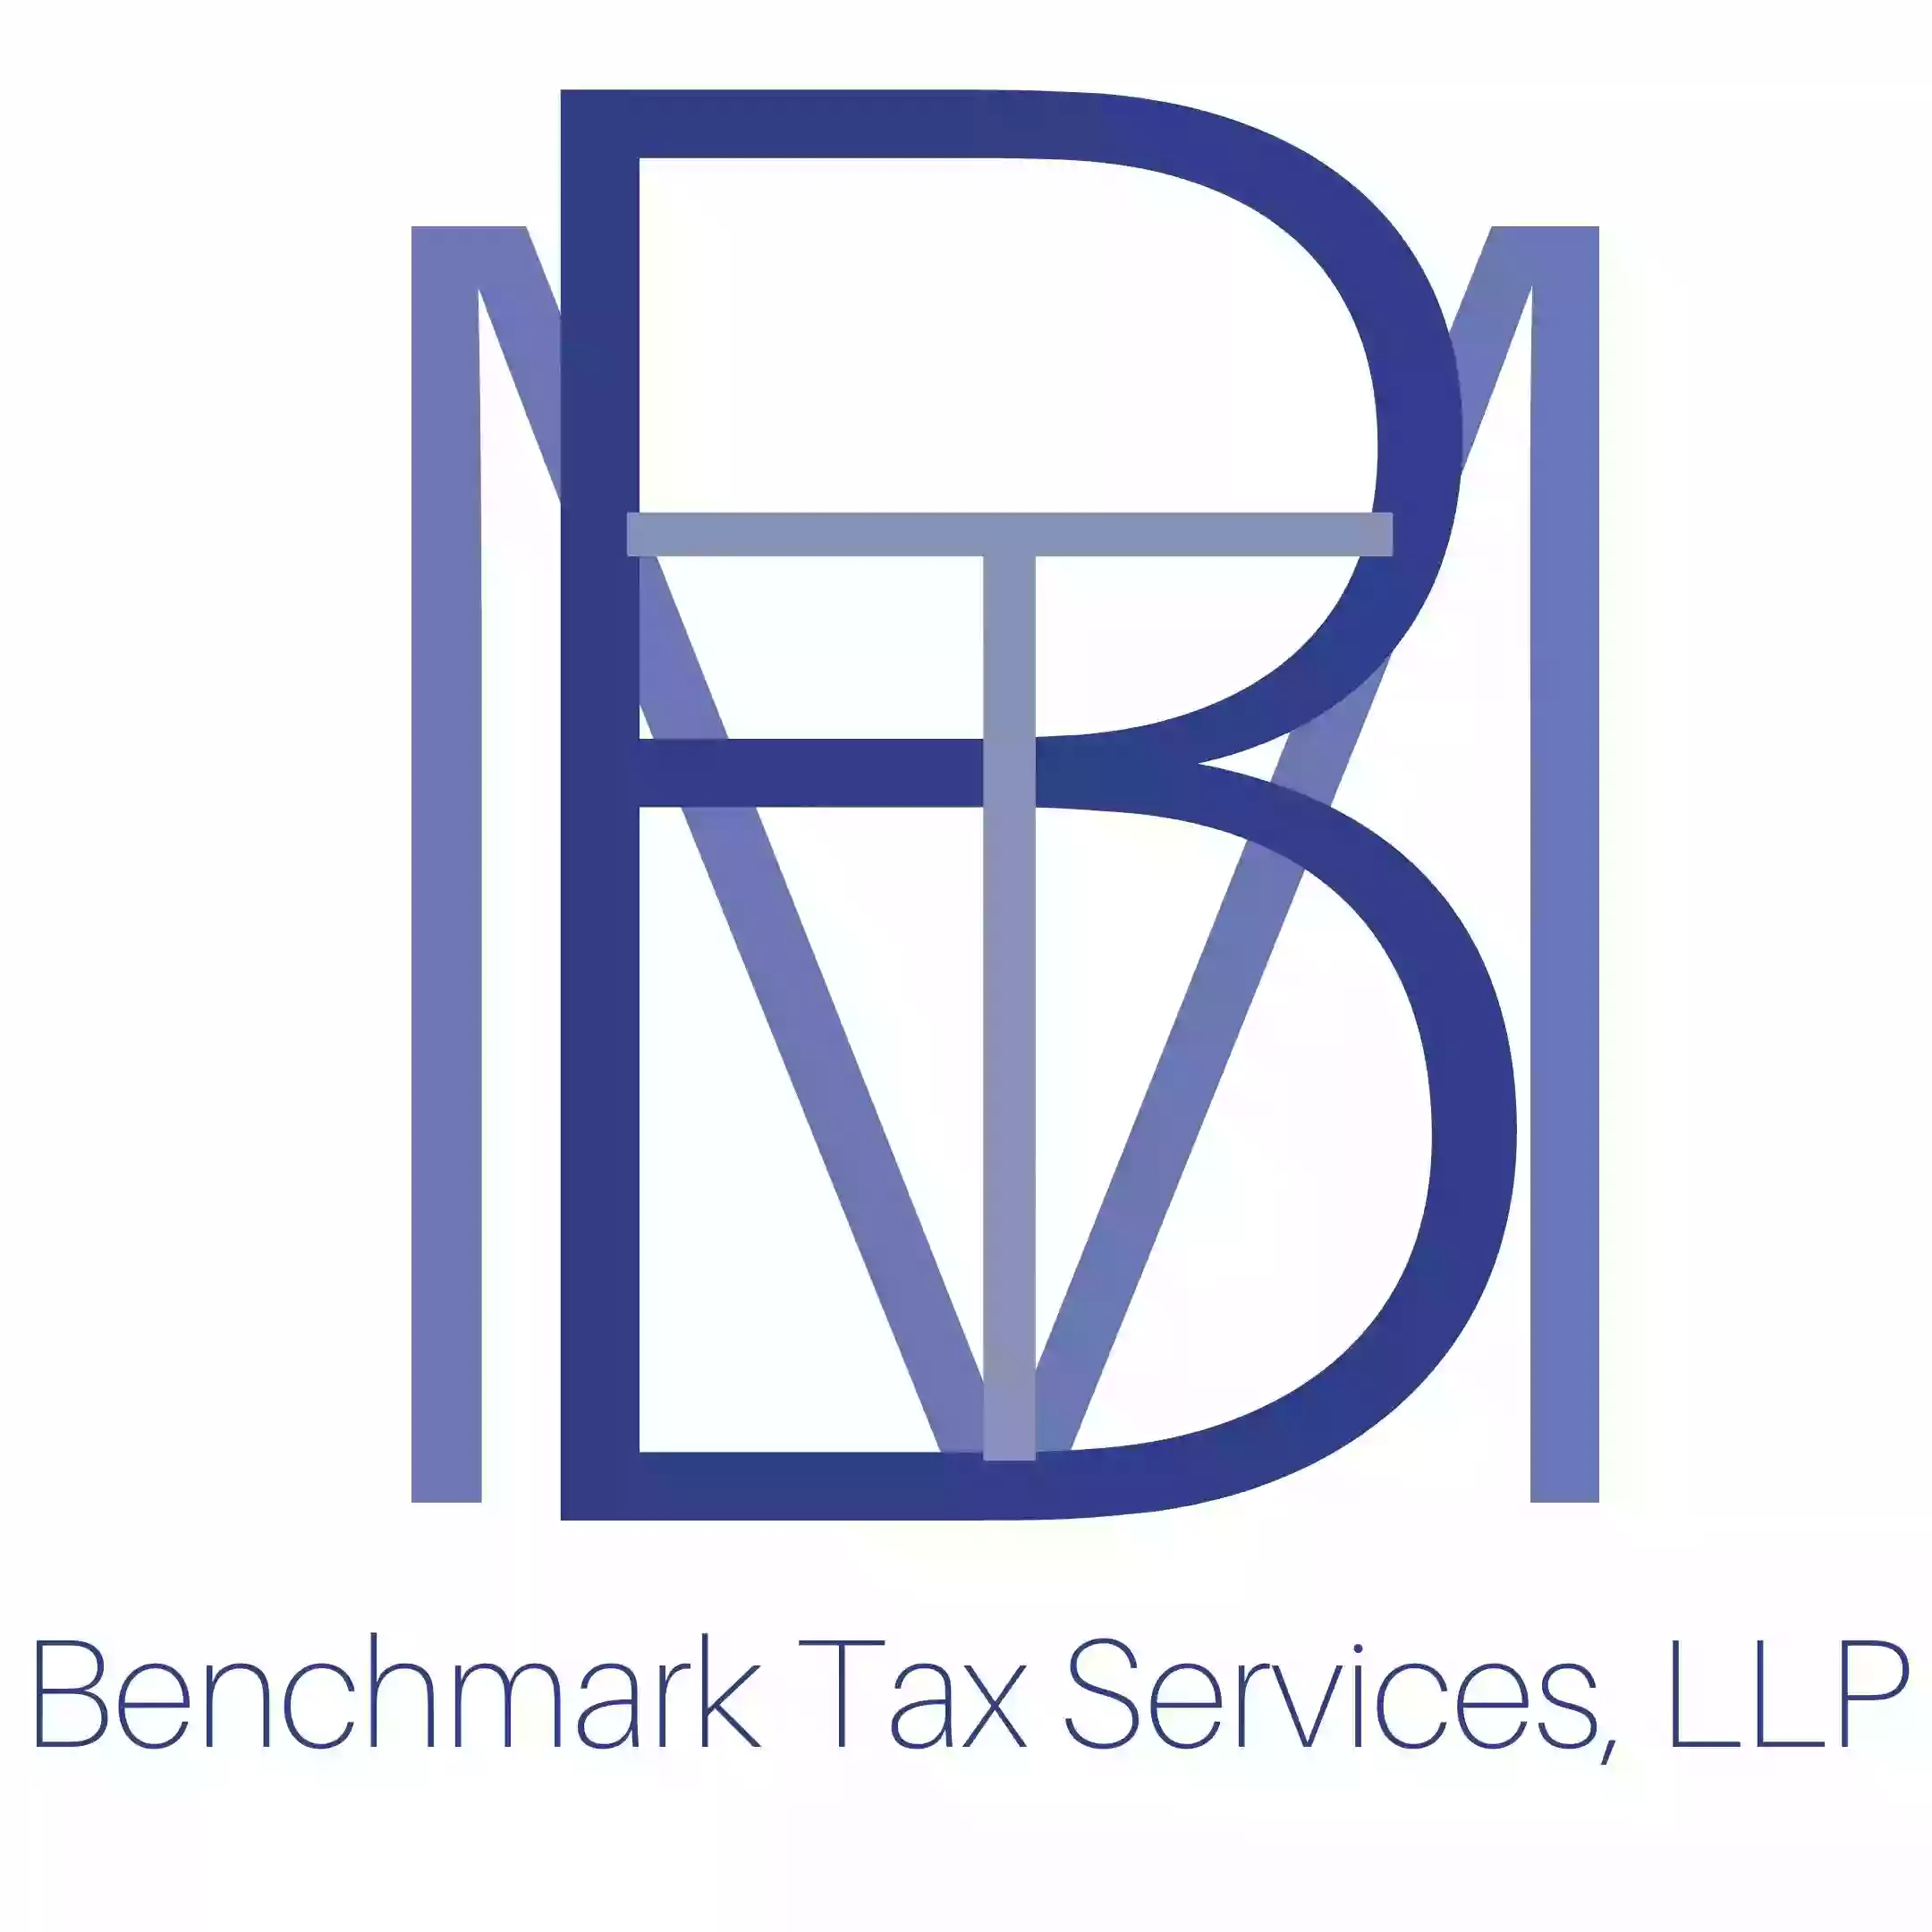 Benchmark Tax Services, LLP